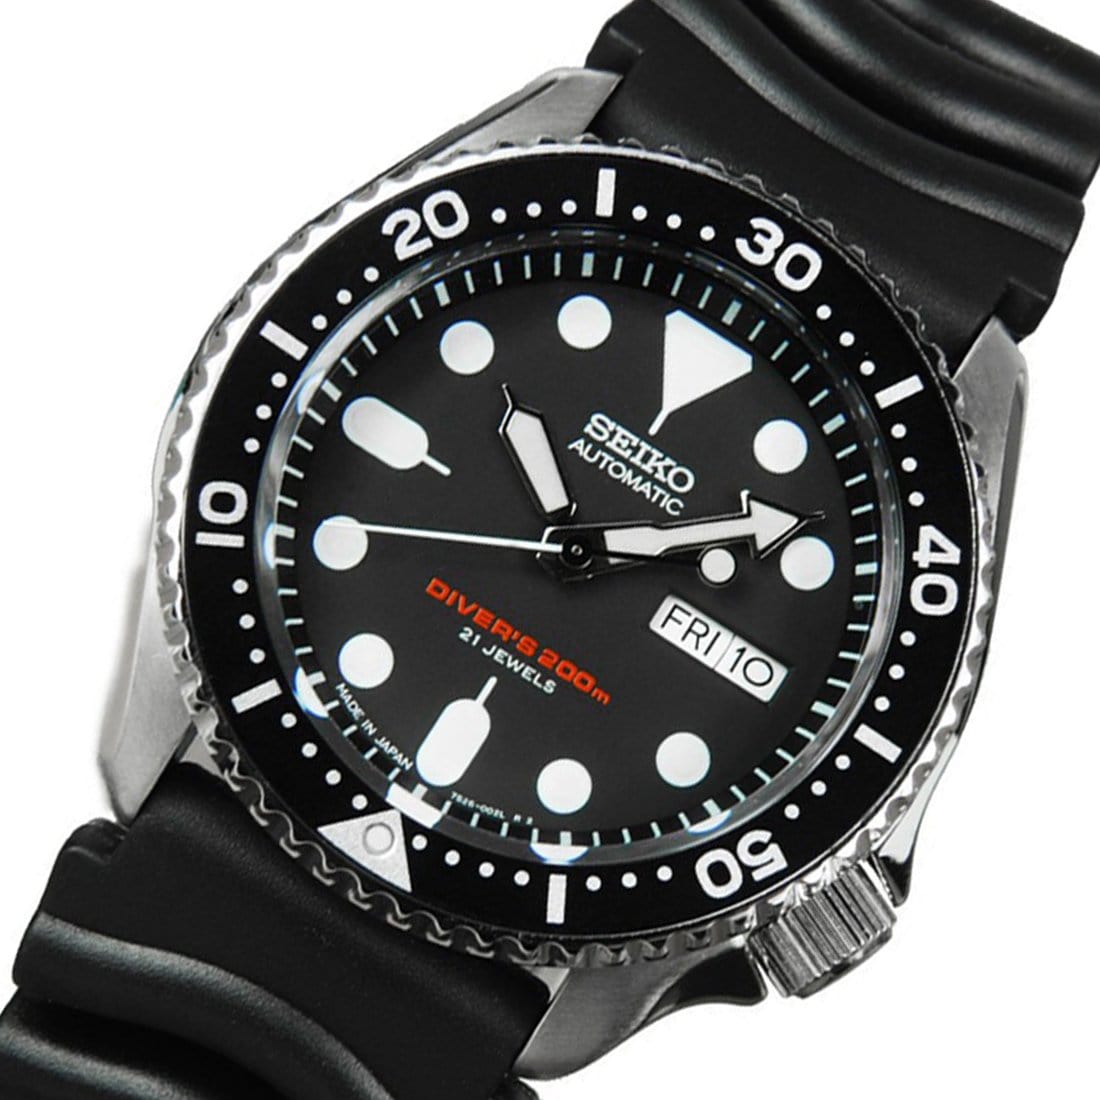 Seiko Automatic Watch SKX007J1 SKX007 with Extra Stainless Mesh Band